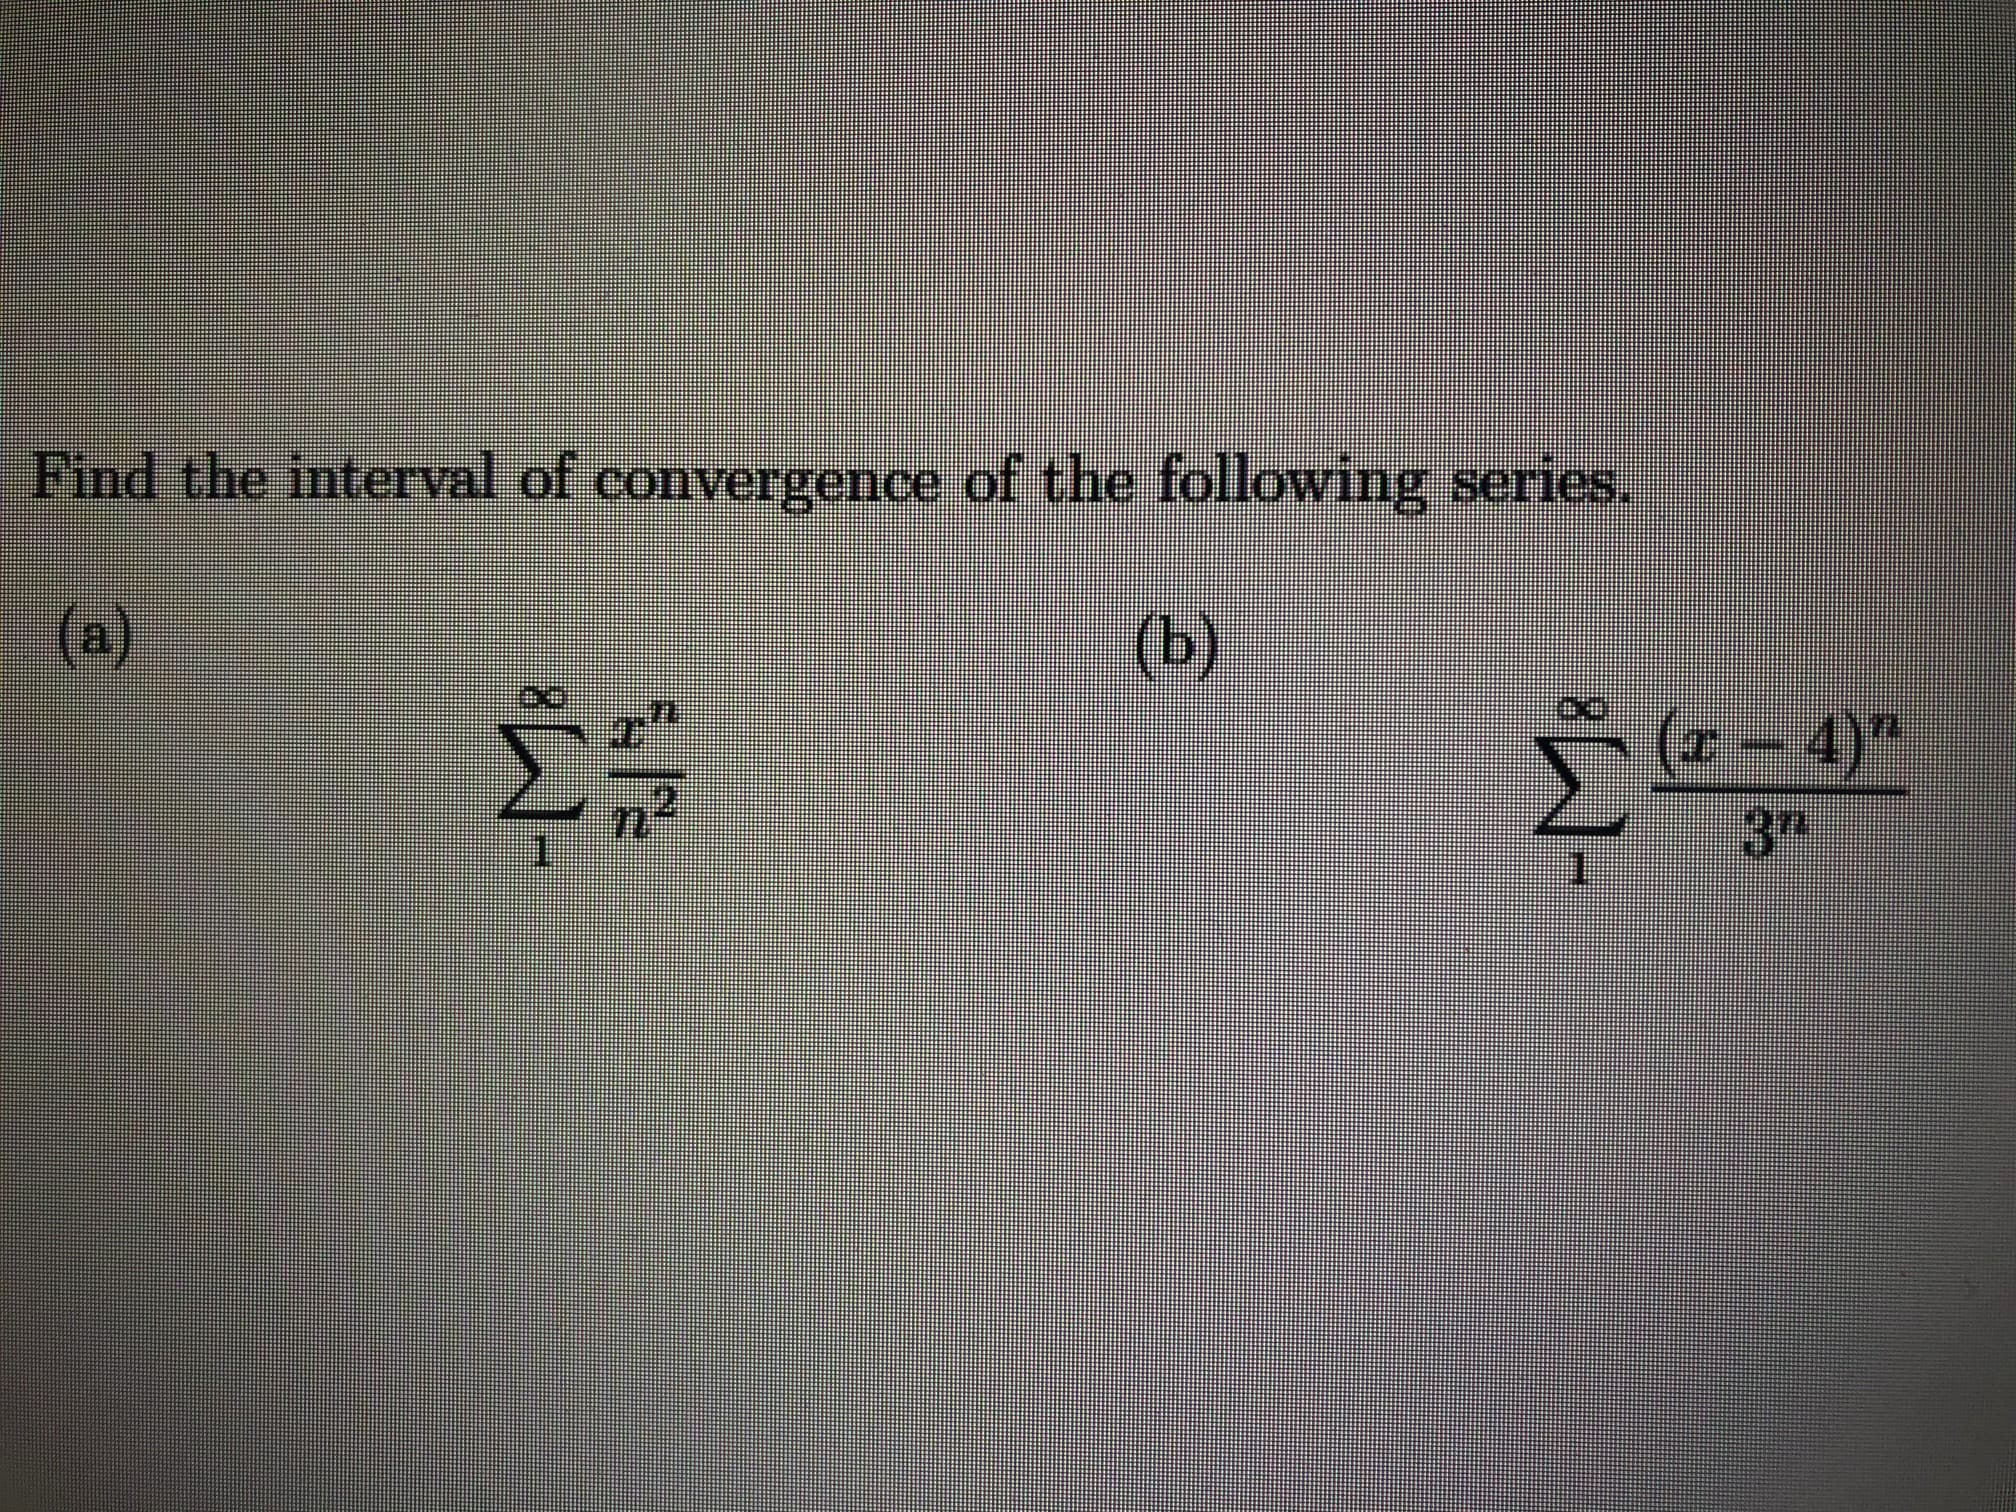 Find the interval of convergence of the following series.
(a)
(b)
(* – 4)"
3"
M8
